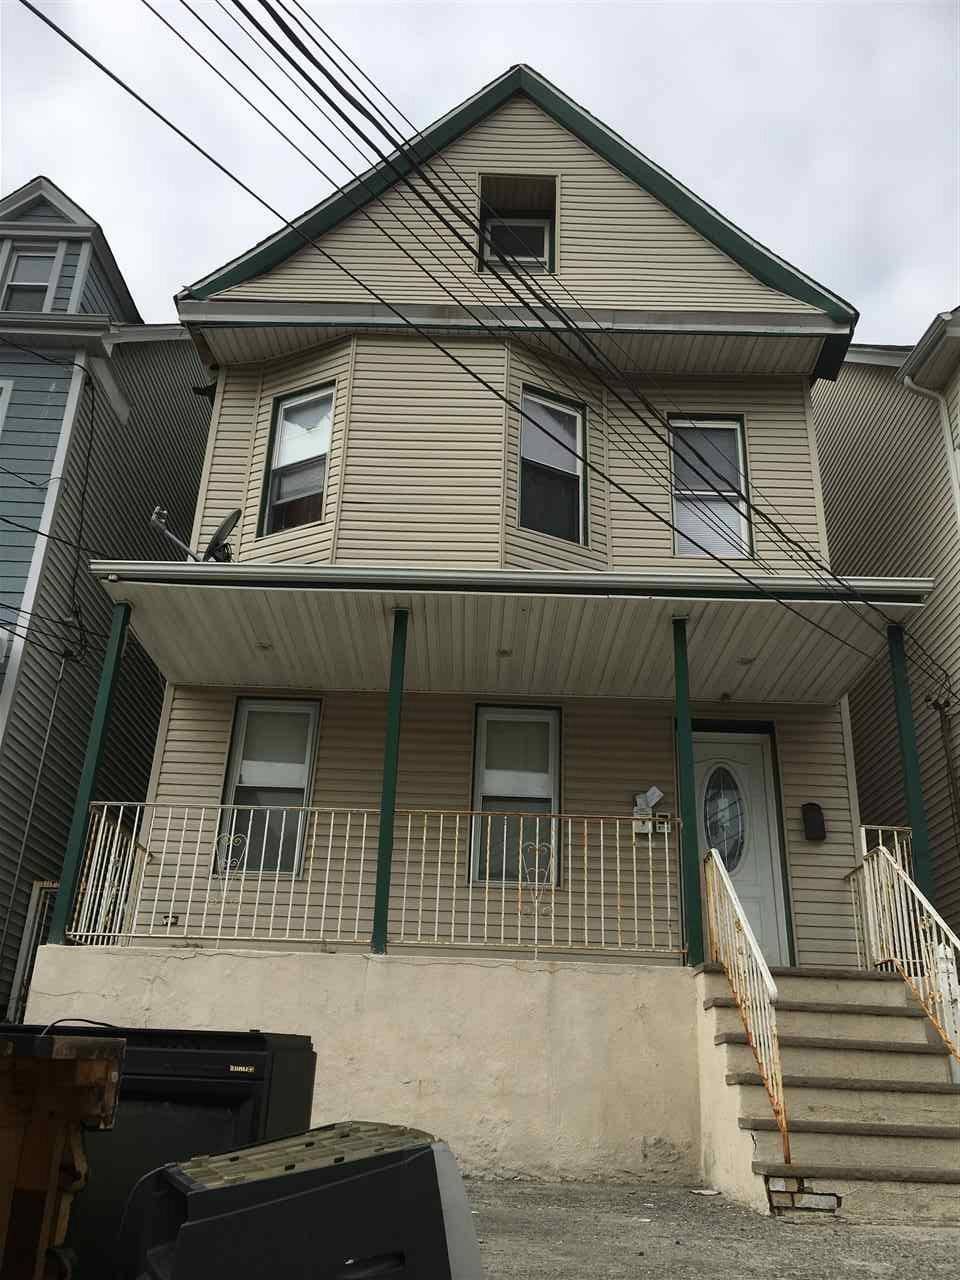 This is a Short Sale - Multi-Family New Jersey